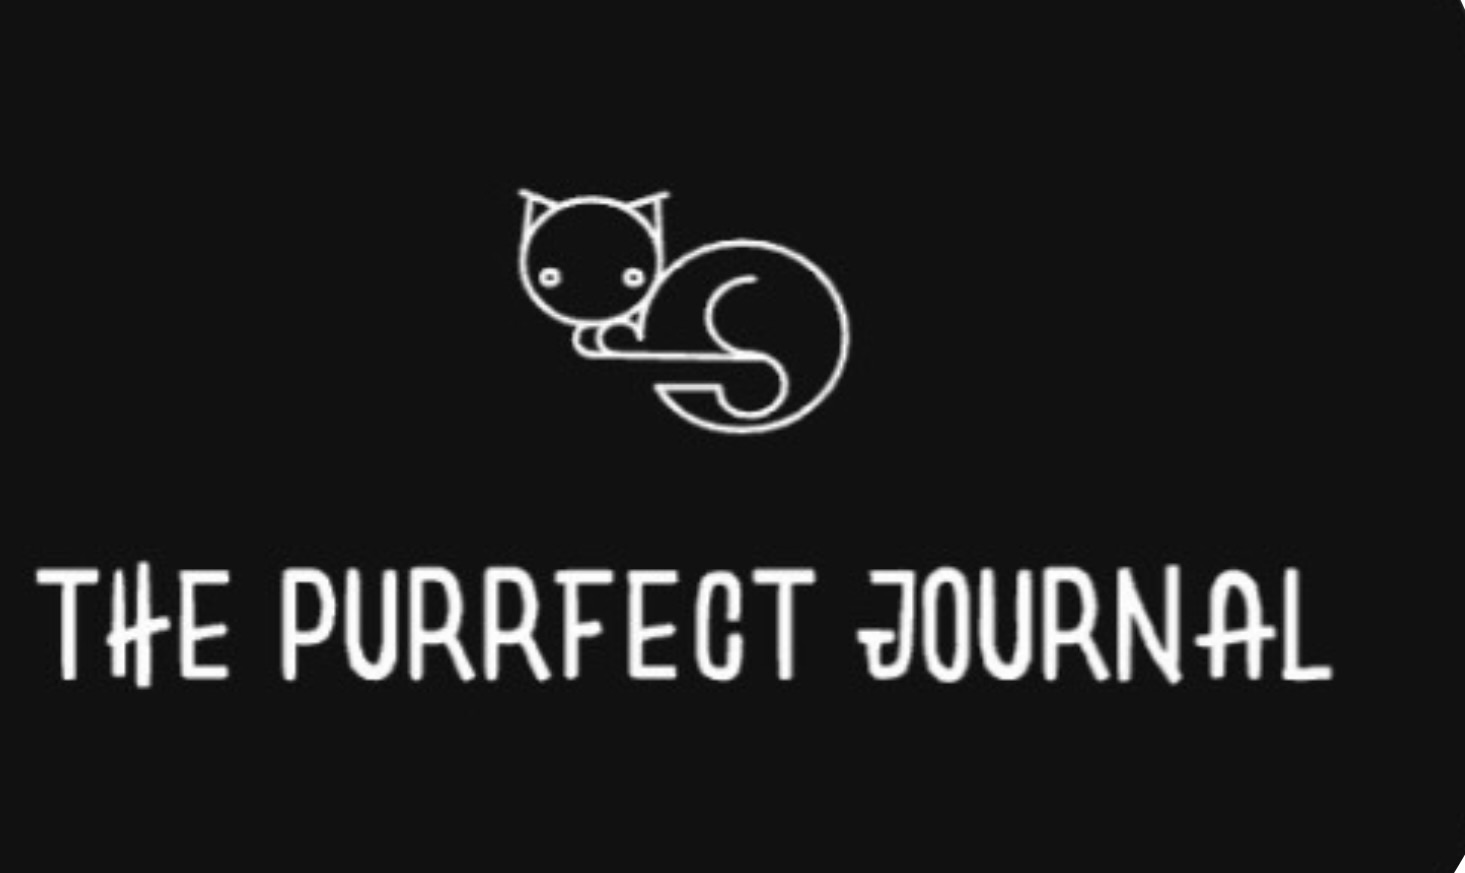 The Purrfect Journal